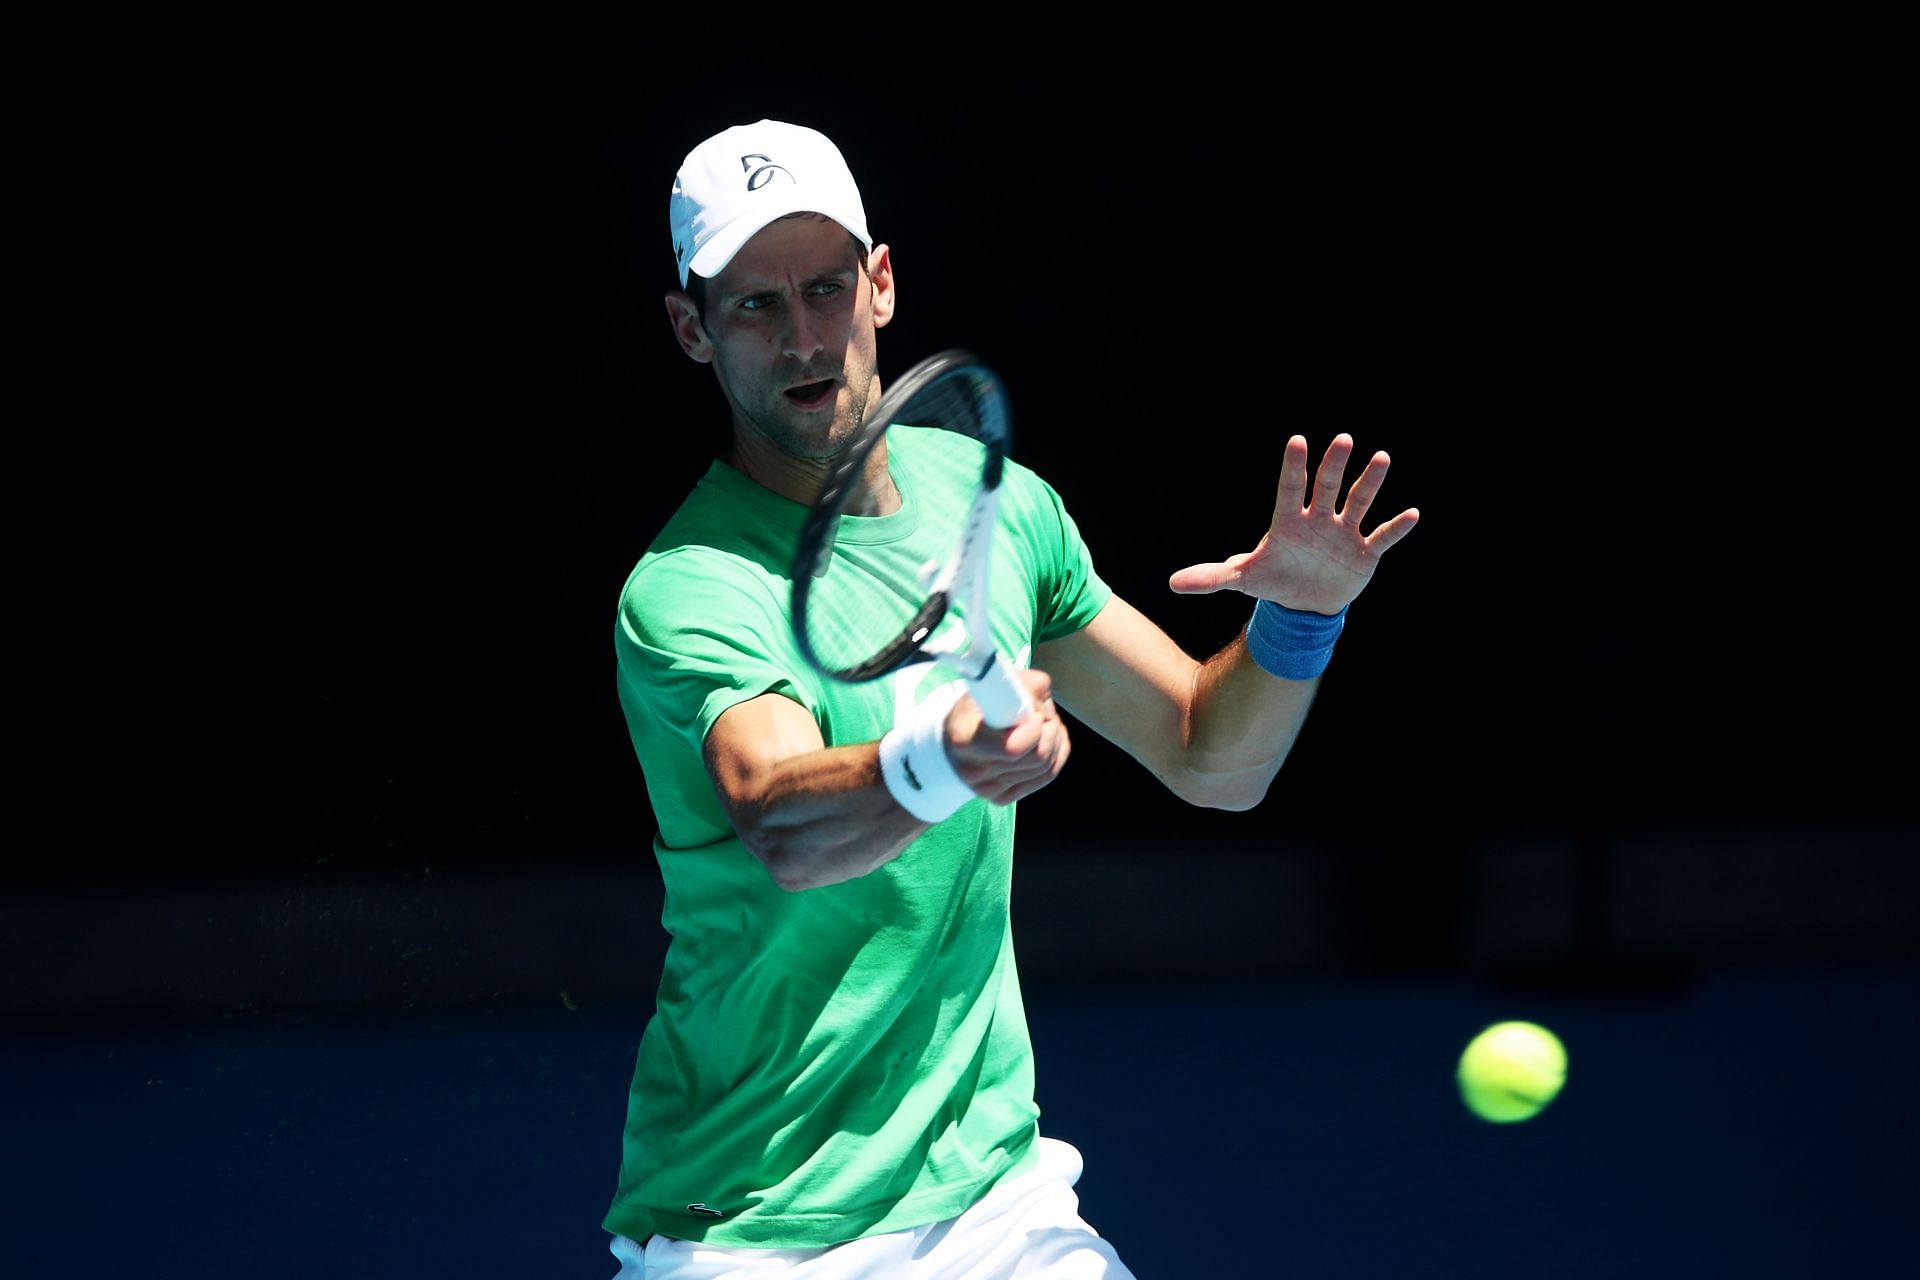 The three-time defending champion Was replaced in the Australian Open draw by lucky loser Salvatore Caruso